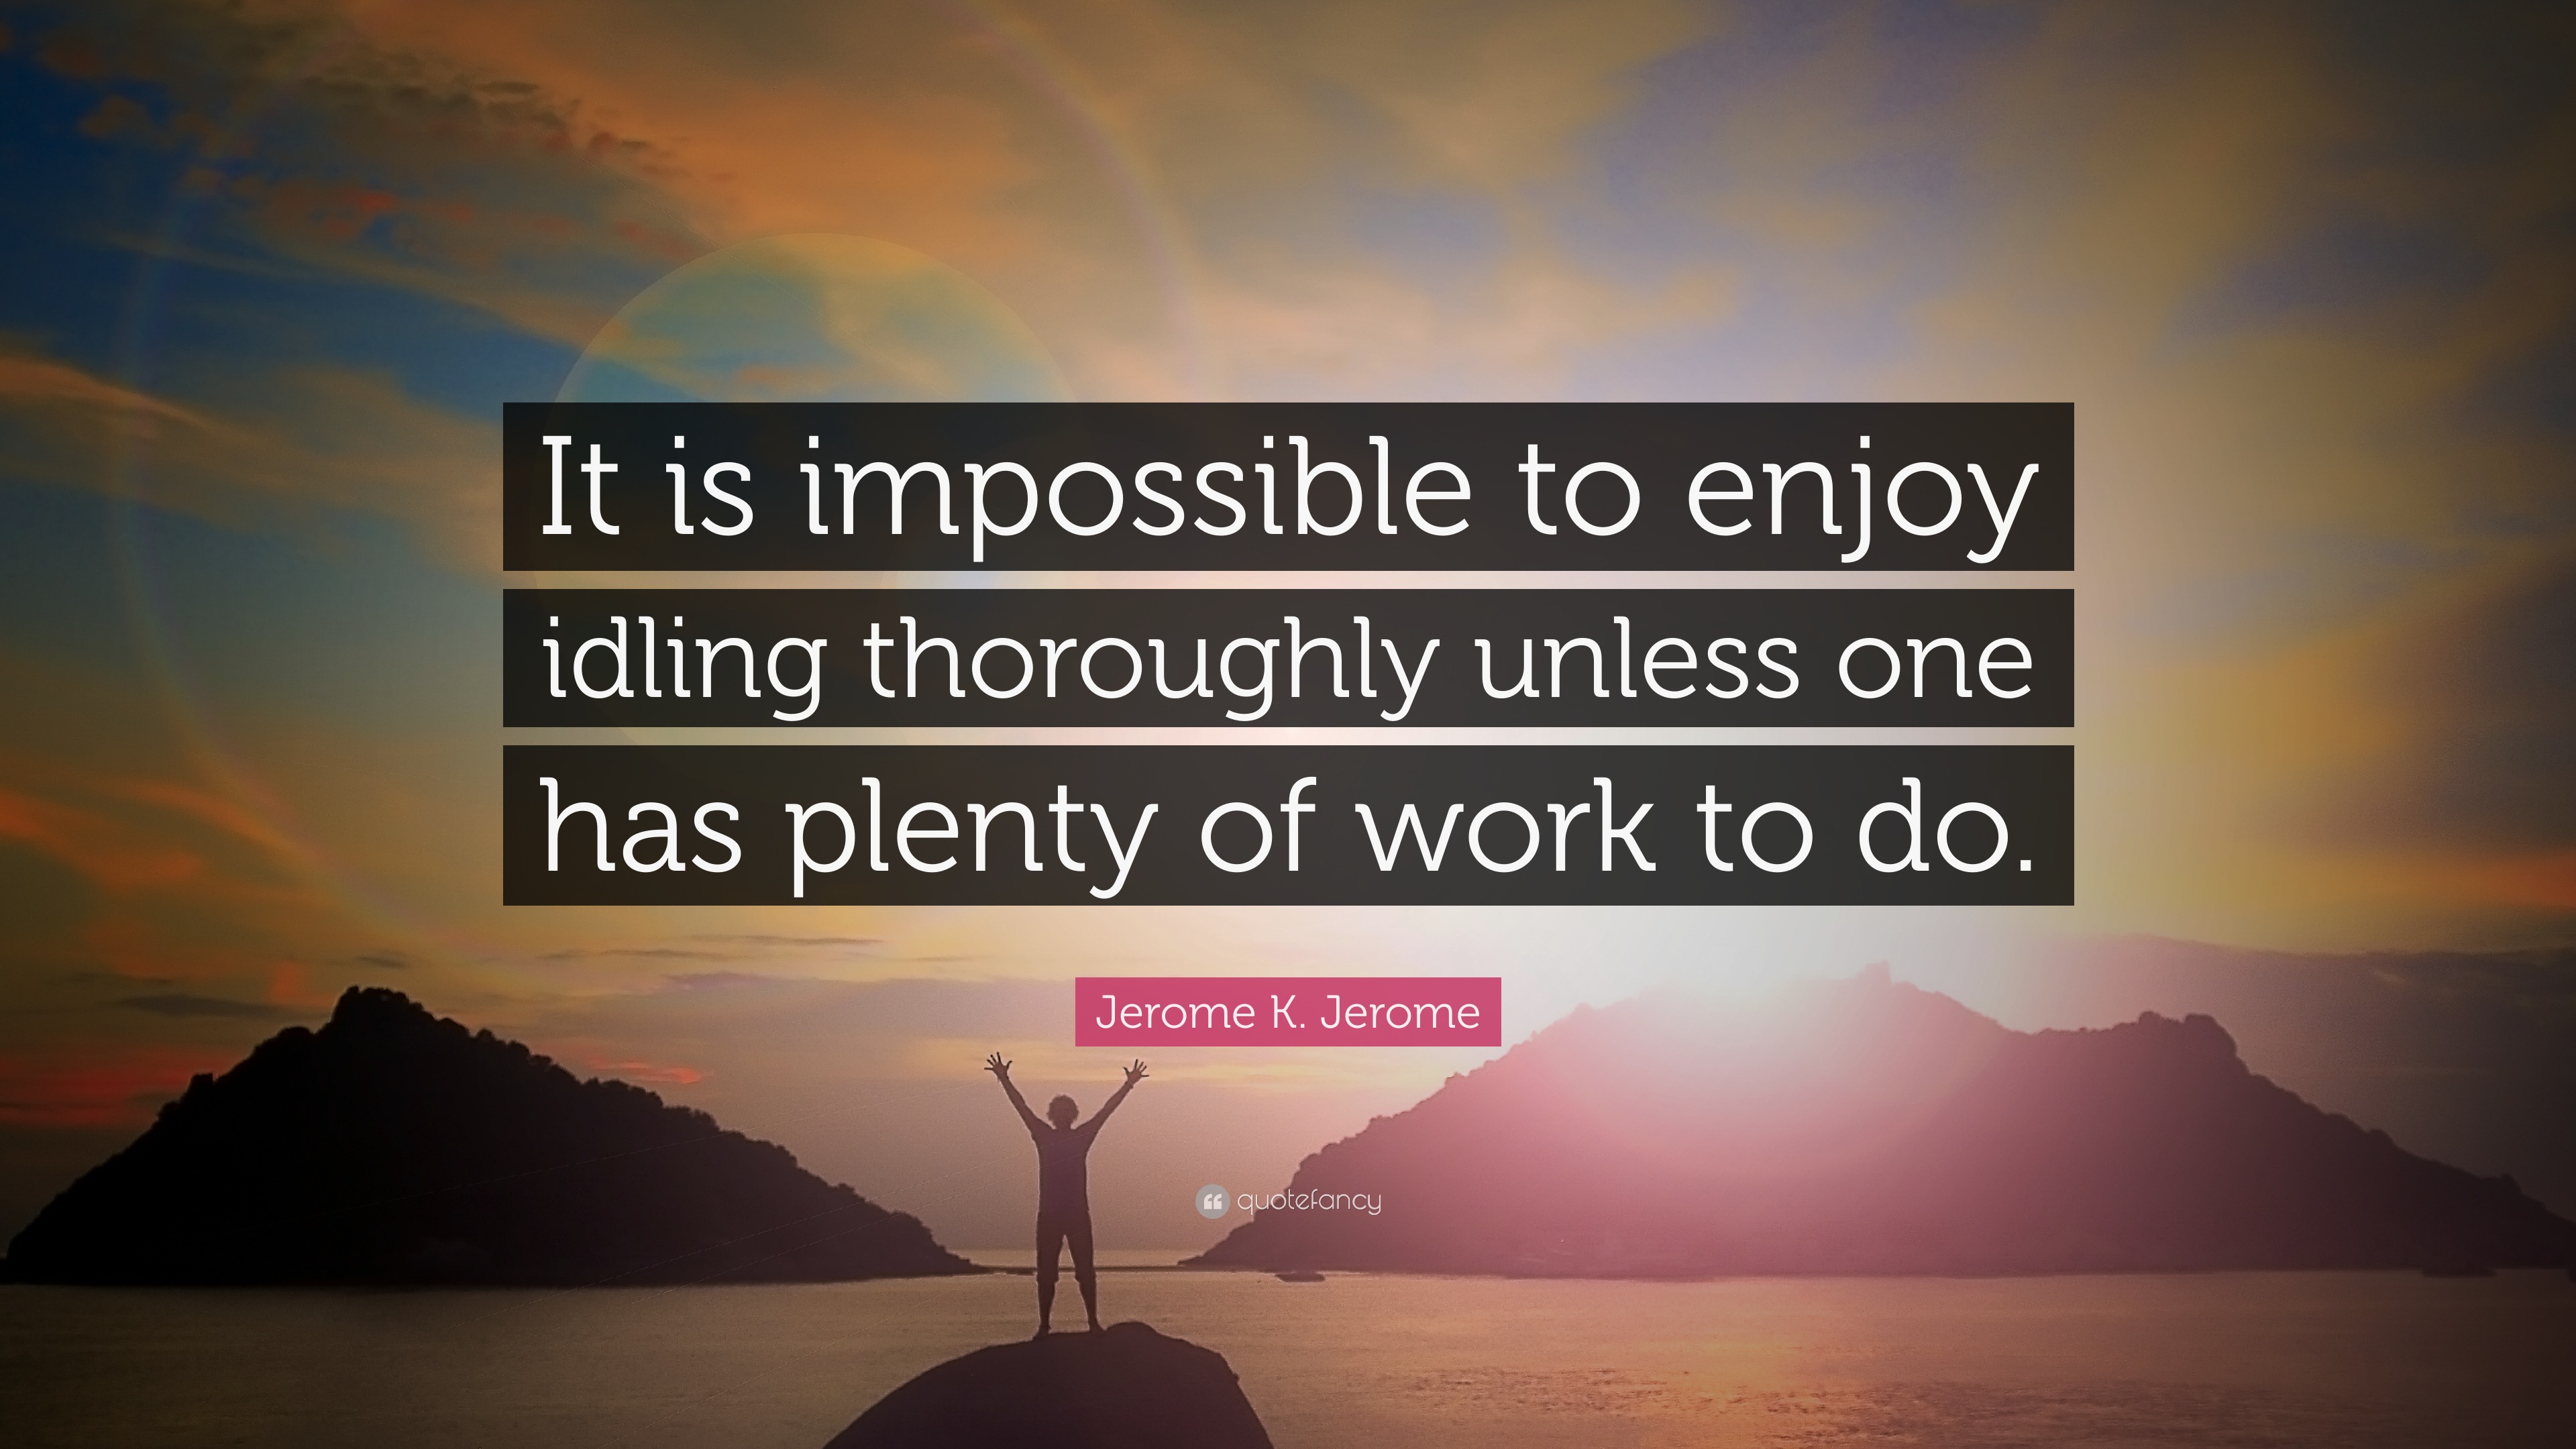 Jerome K. Jerome Quote: “It is impossible to enjoy idling thoroughly ...